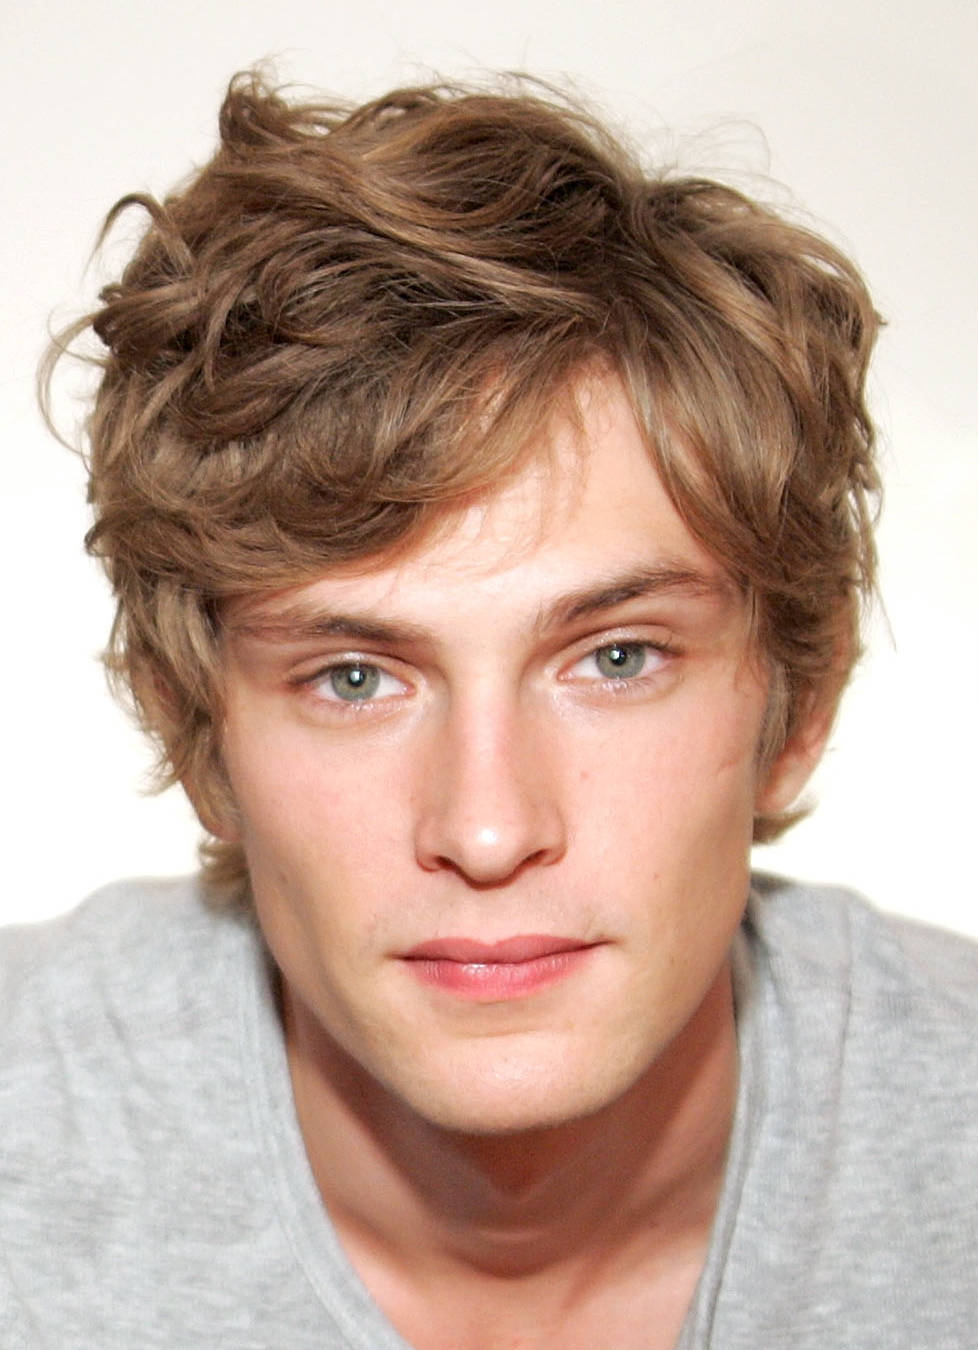 Short Hairstyles for Boys with Curly Hair